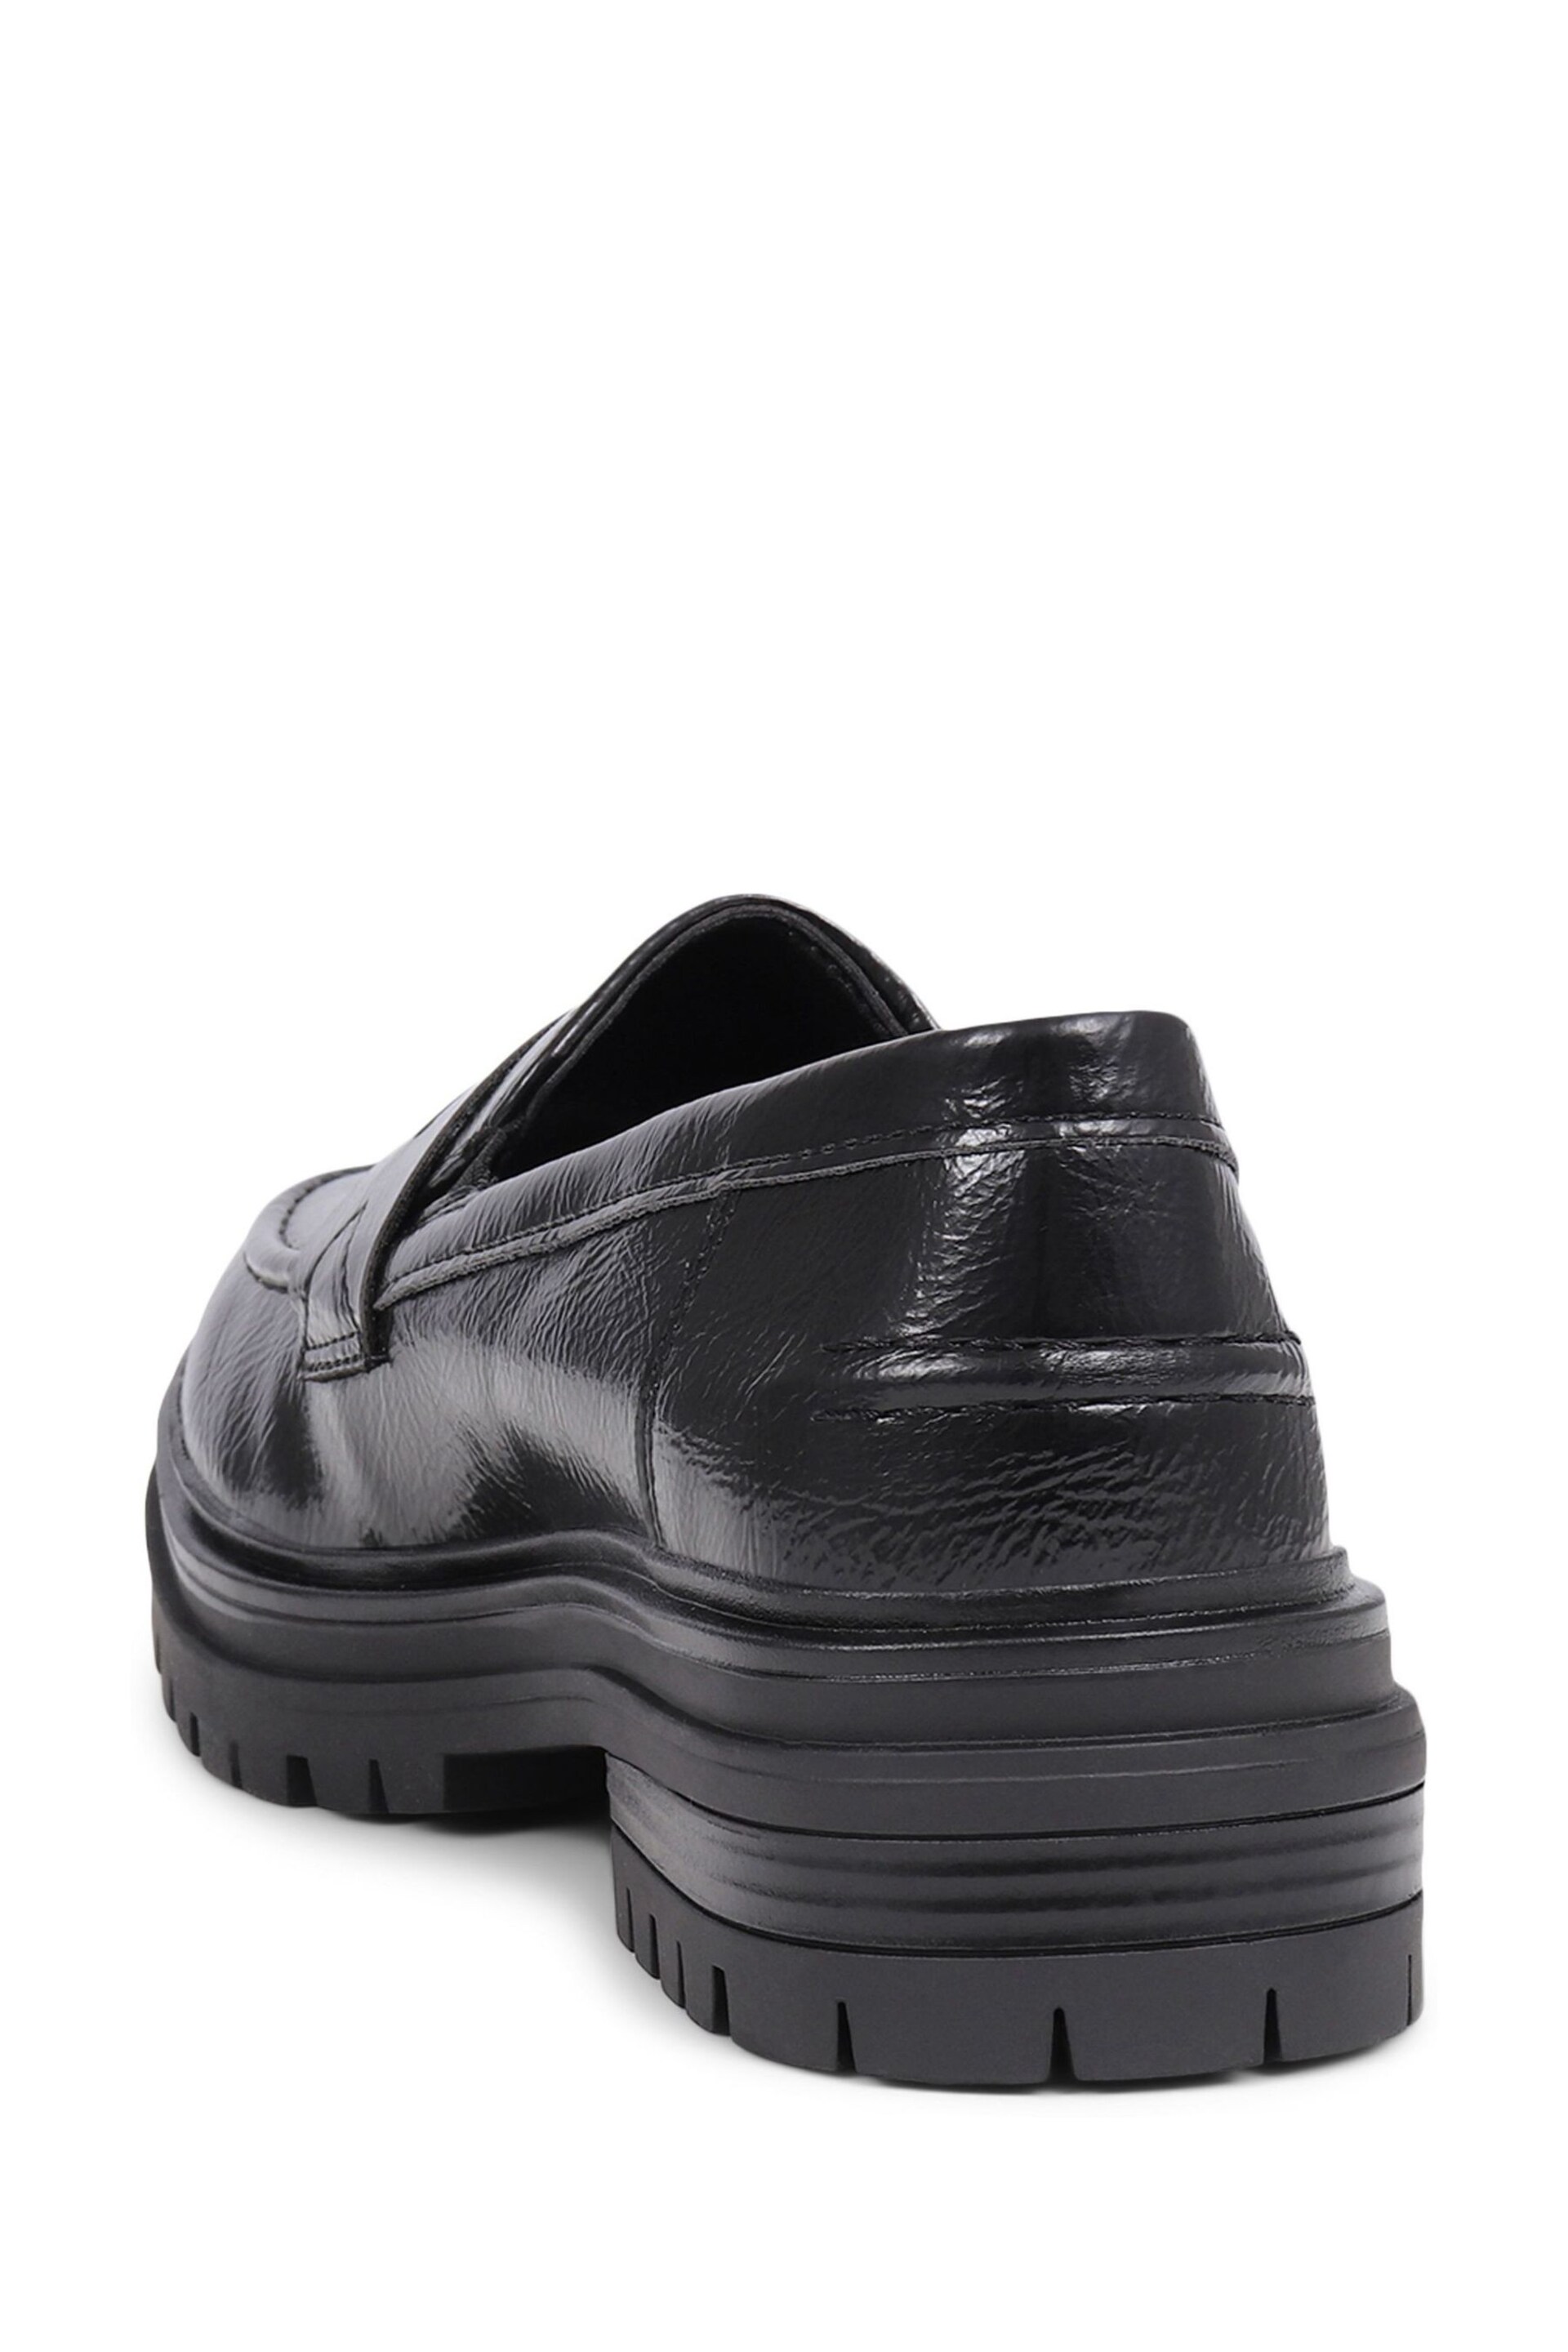 Pavers Chunky Black Loafers - Image 3 of 5